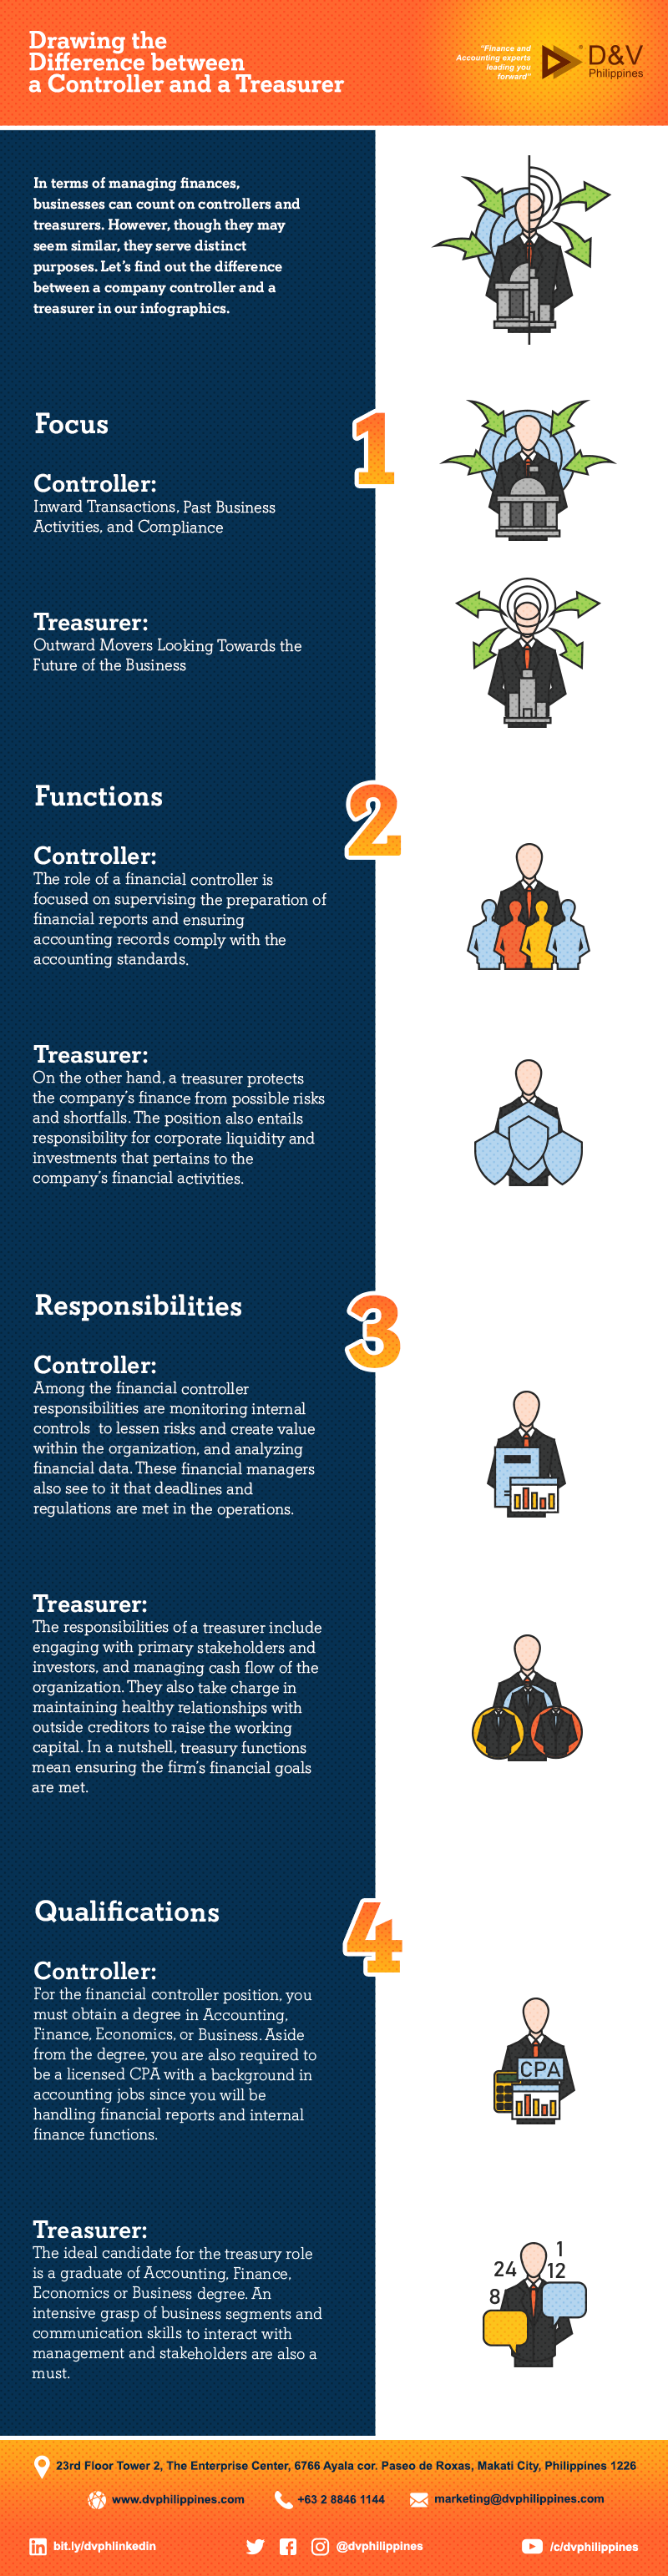 Infograpihcs_Difference-between-a-Controller-and-a-Treasurer_Main